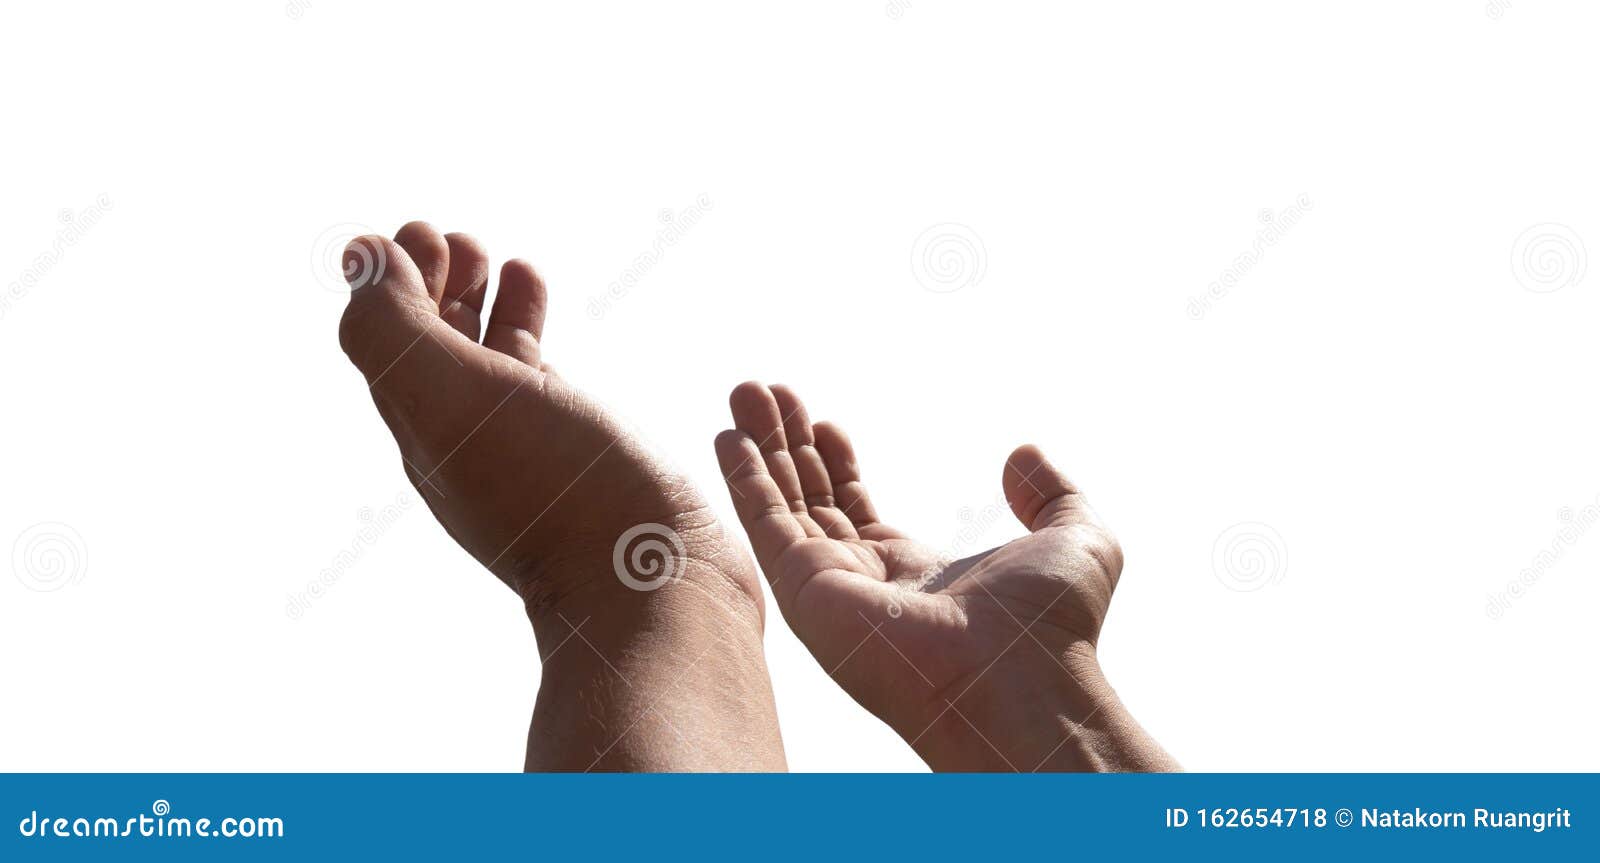 praying hands of a man for blessings his god  on white background with clipping path